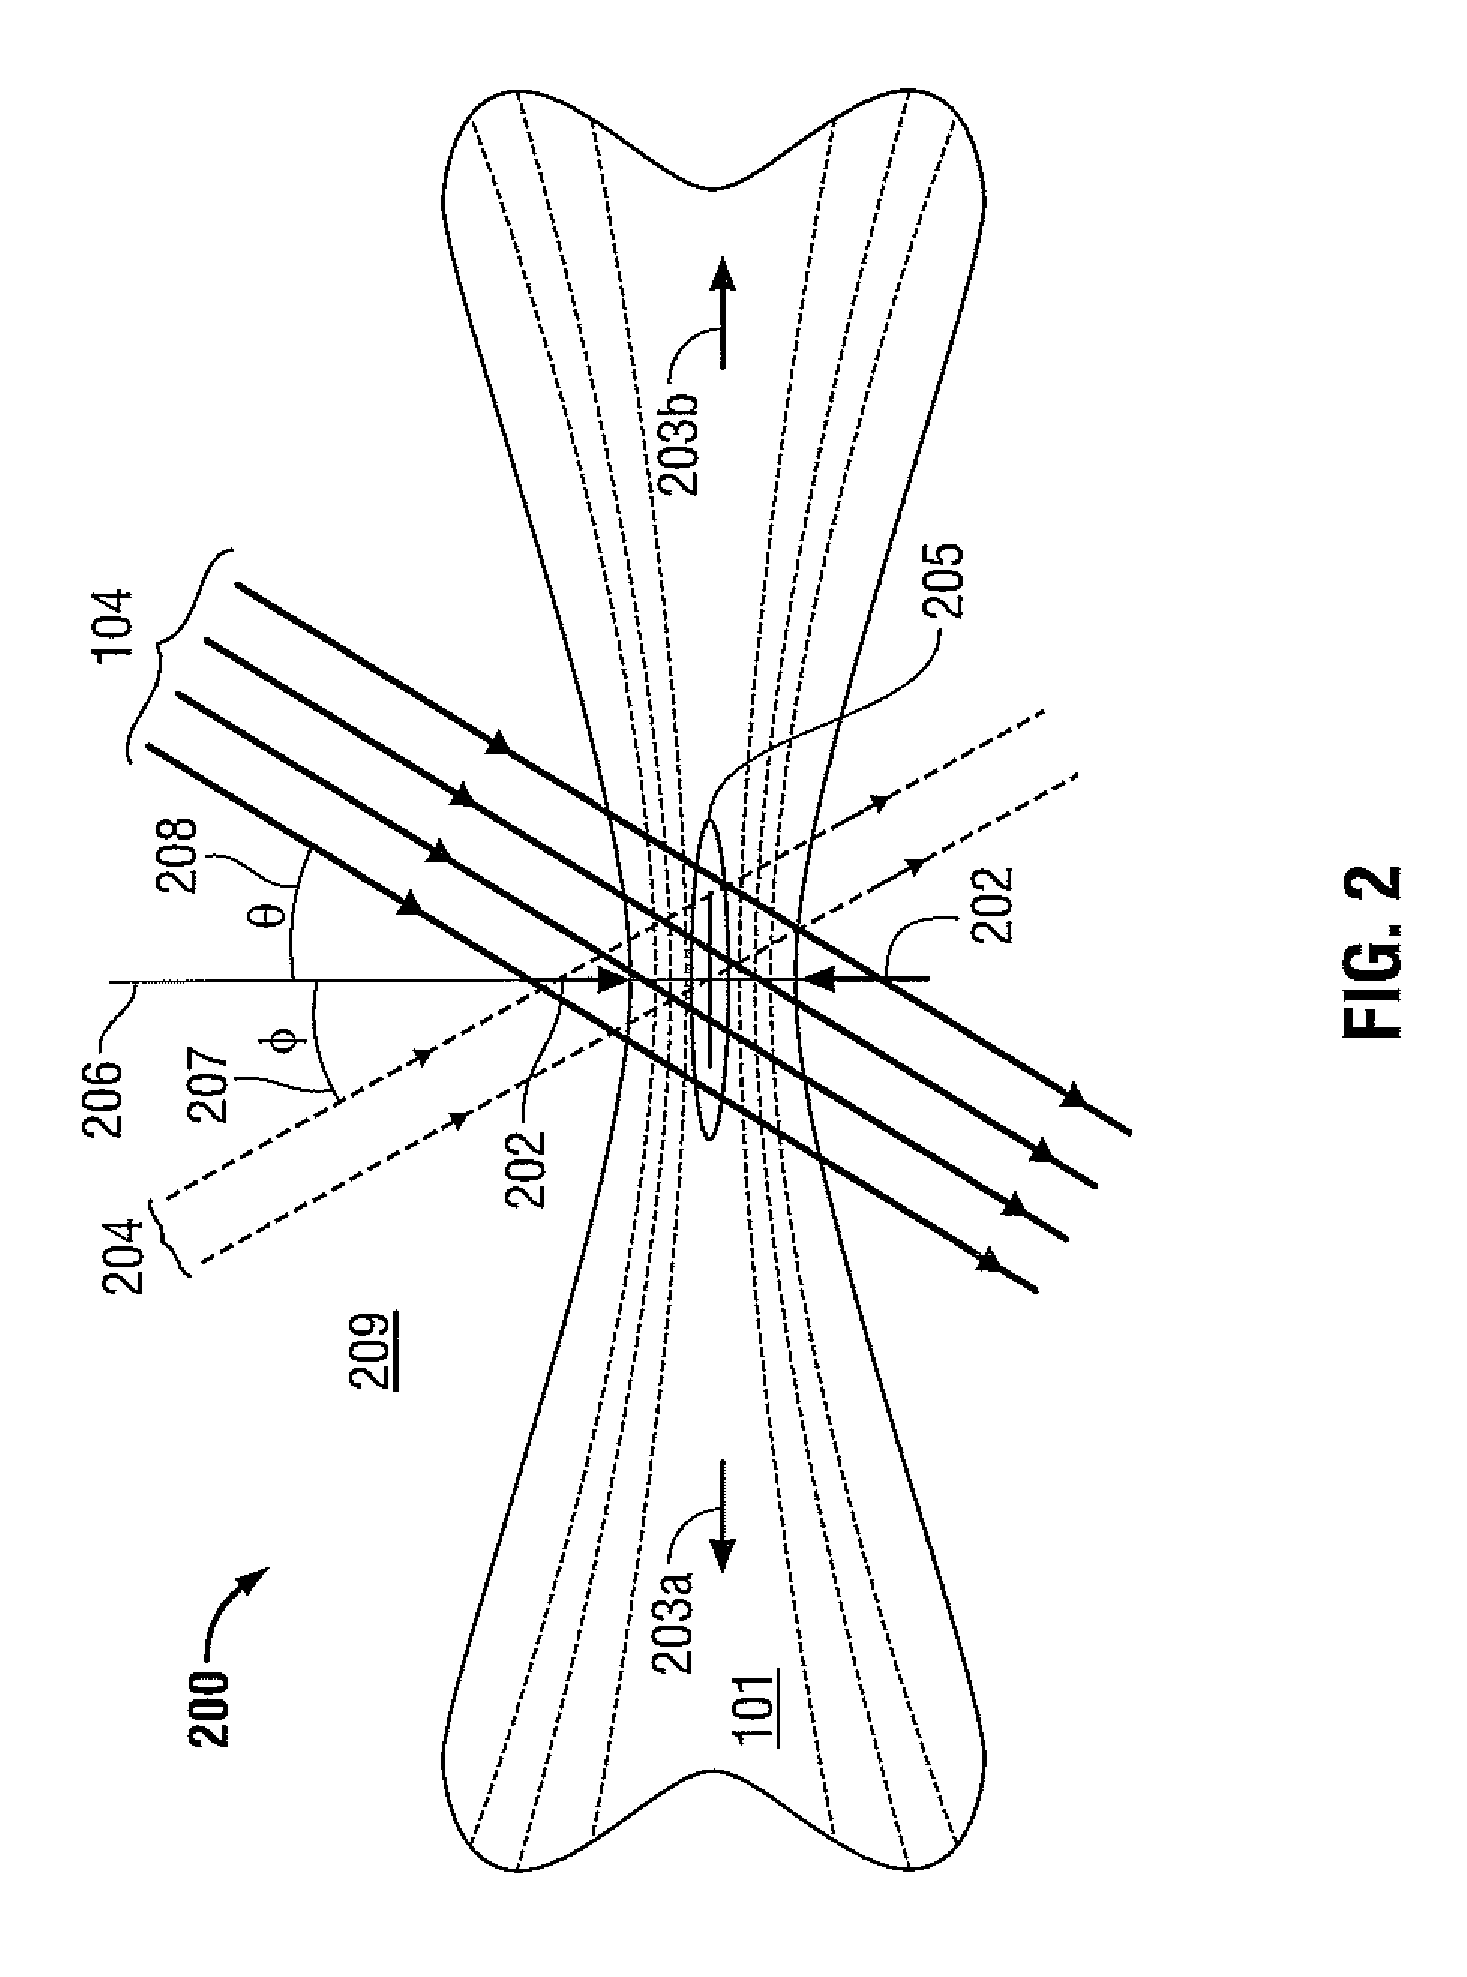 Optical Energy-Based Methods and Apparatus for Tissue Sealing